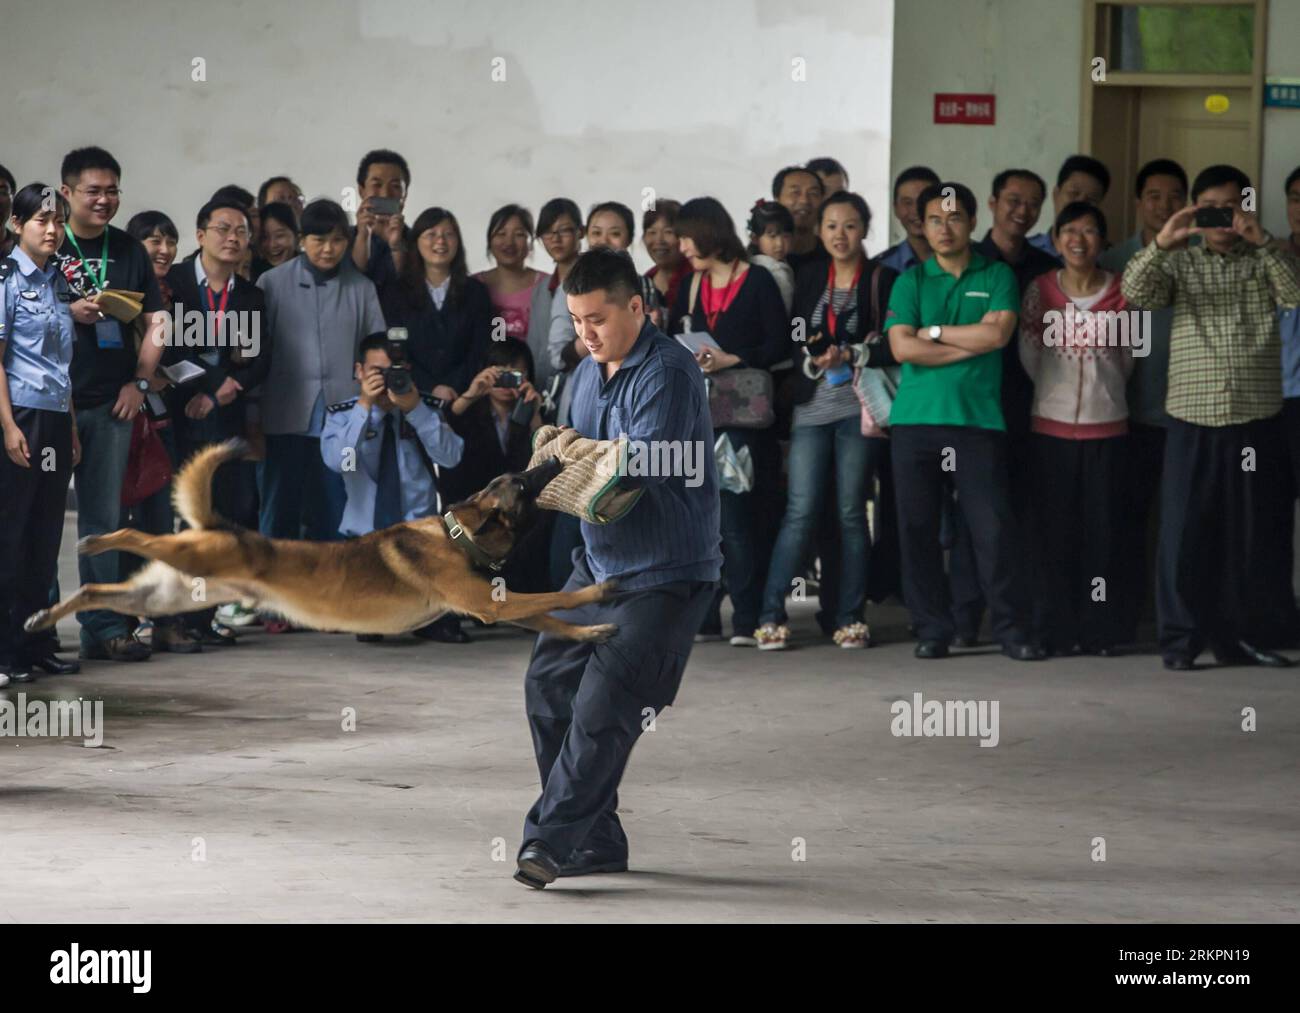 Bildnummer: 58030737  Datum: 24.05.2012  Copyright: imago/Xinhua (120524) -- CHONGQING, May 24, 2012 (Xinhua) -- Citizens watch a skill show of police dogs at the tracker dog base of the Municipal Public Security Bureau in Chongqing, southwest China, May 24, 2012. More than 30 citizens were invited to visit the base on Thursday. (Xinhua/Chen Cheng)(mcg) CHINA-CHONGQING-TRACKER DOG BASE (CN) PUBLICATIONxNOTxINxCHN Gesellschaft Polizei Polizeihund Ausbildung x0x xkg 2012 quer      58030737 Date 24 05 2012 Copyright Imago XINHUA  Chongqing May 24 2012 XINHUA Citizens Watch a Skill Show of Police Stock Photo